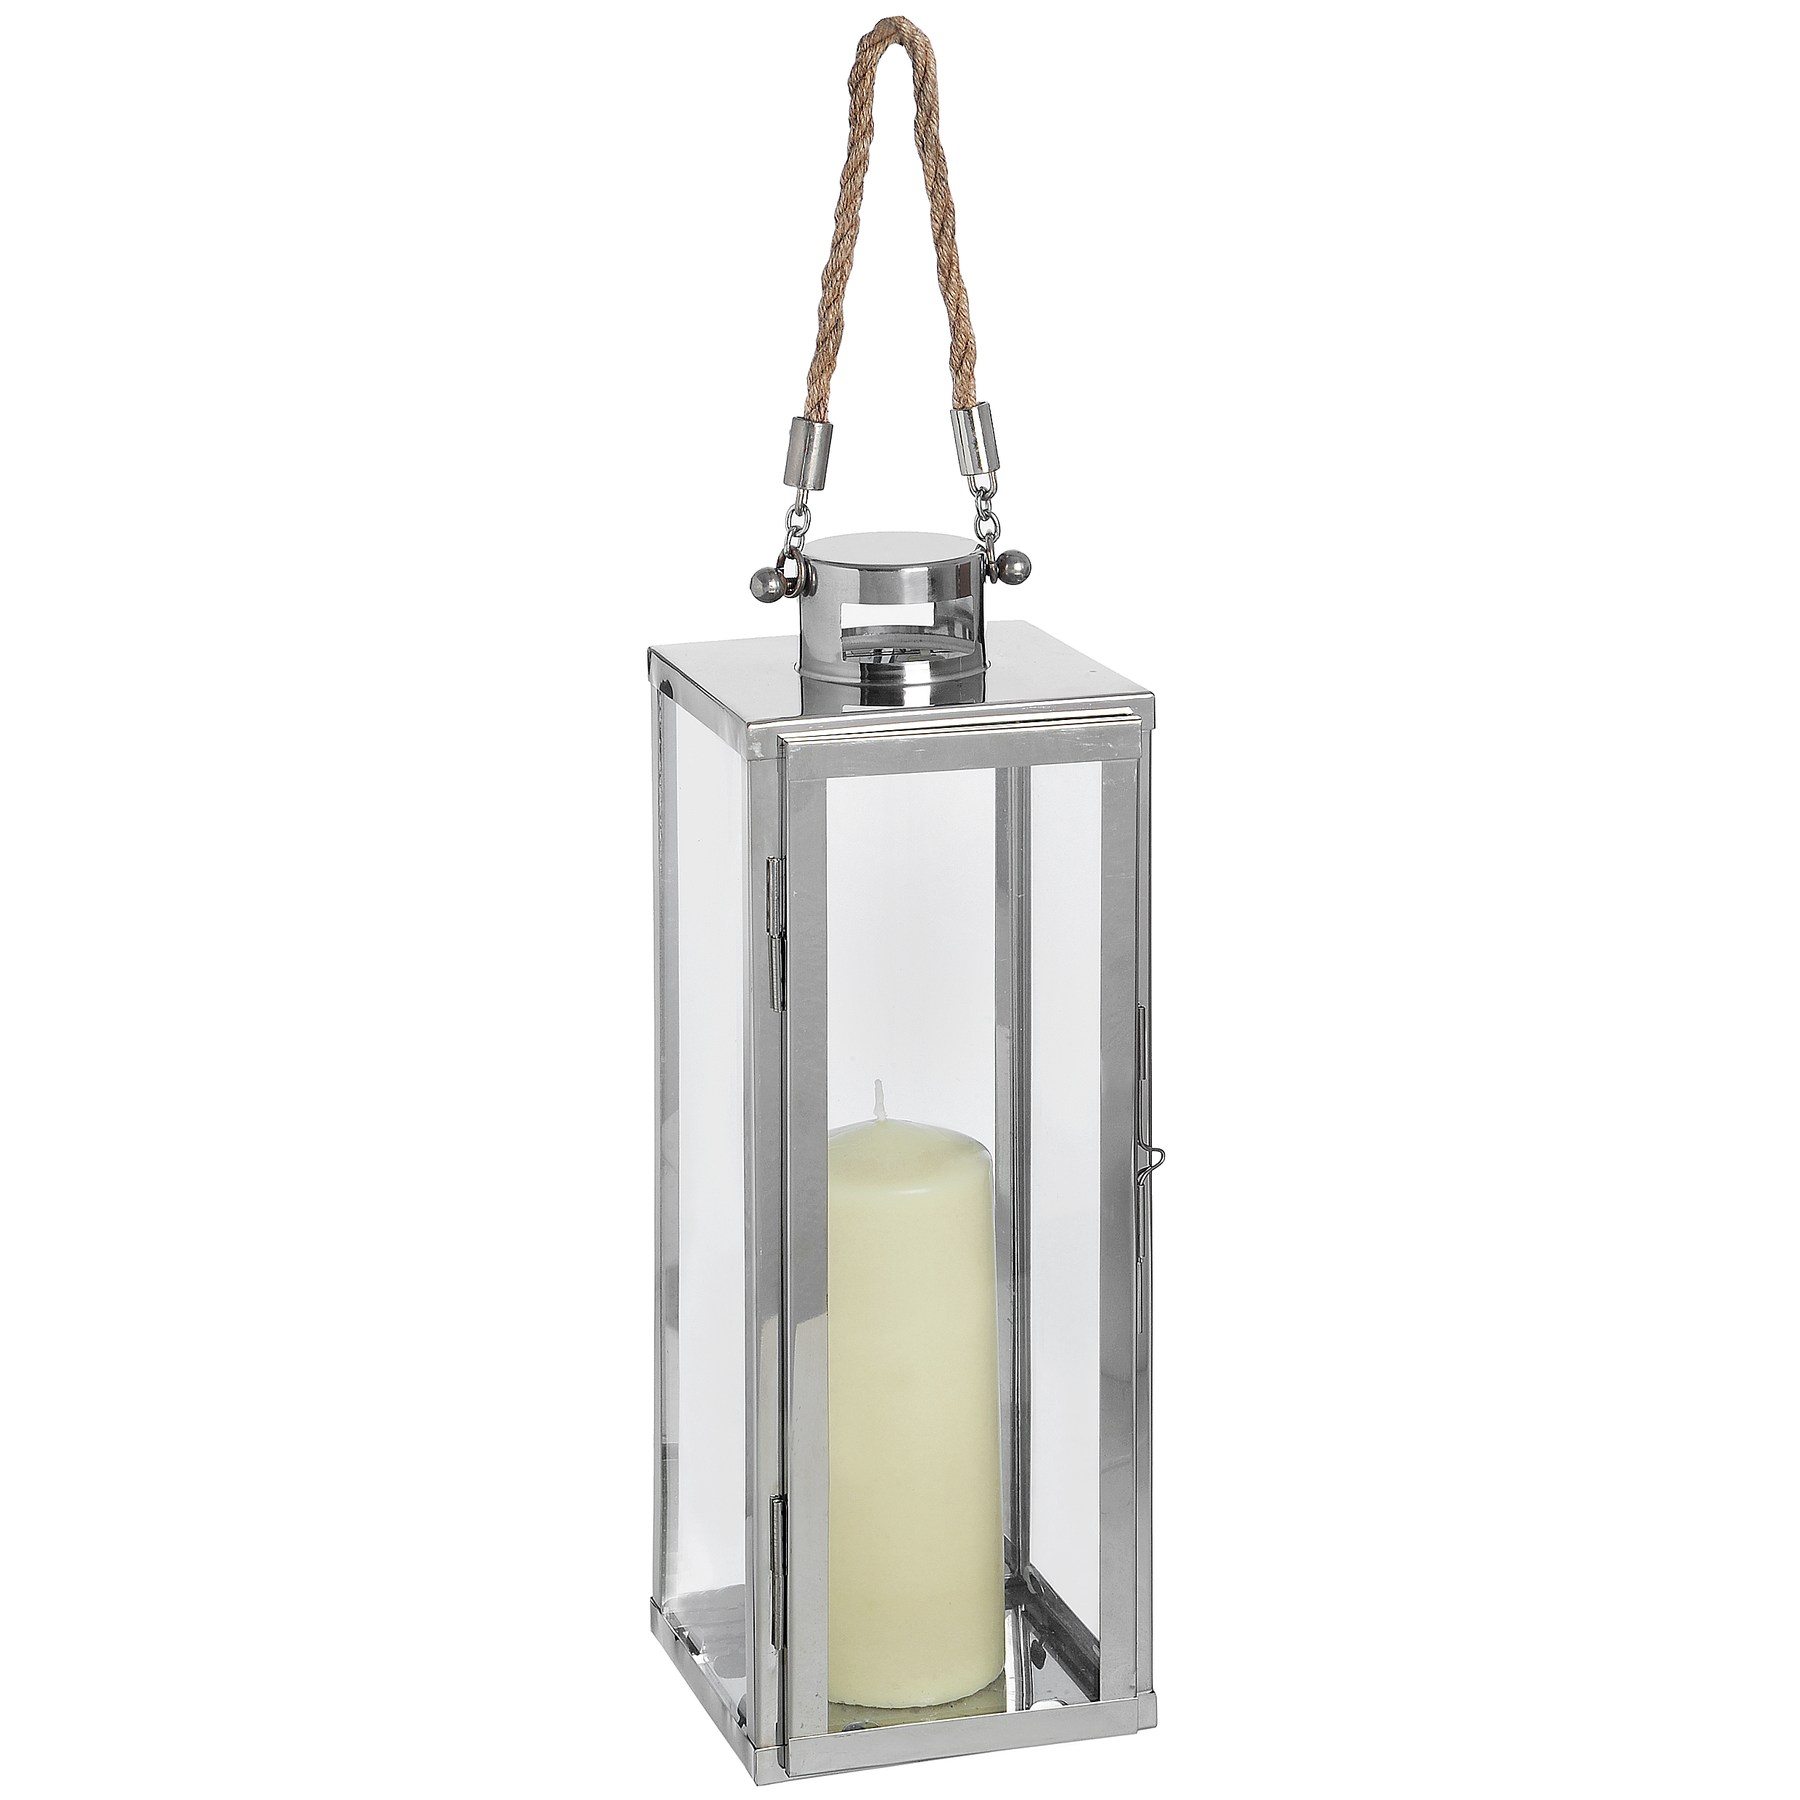 modern chrome floor lantern with rope handle From Hill Interiors